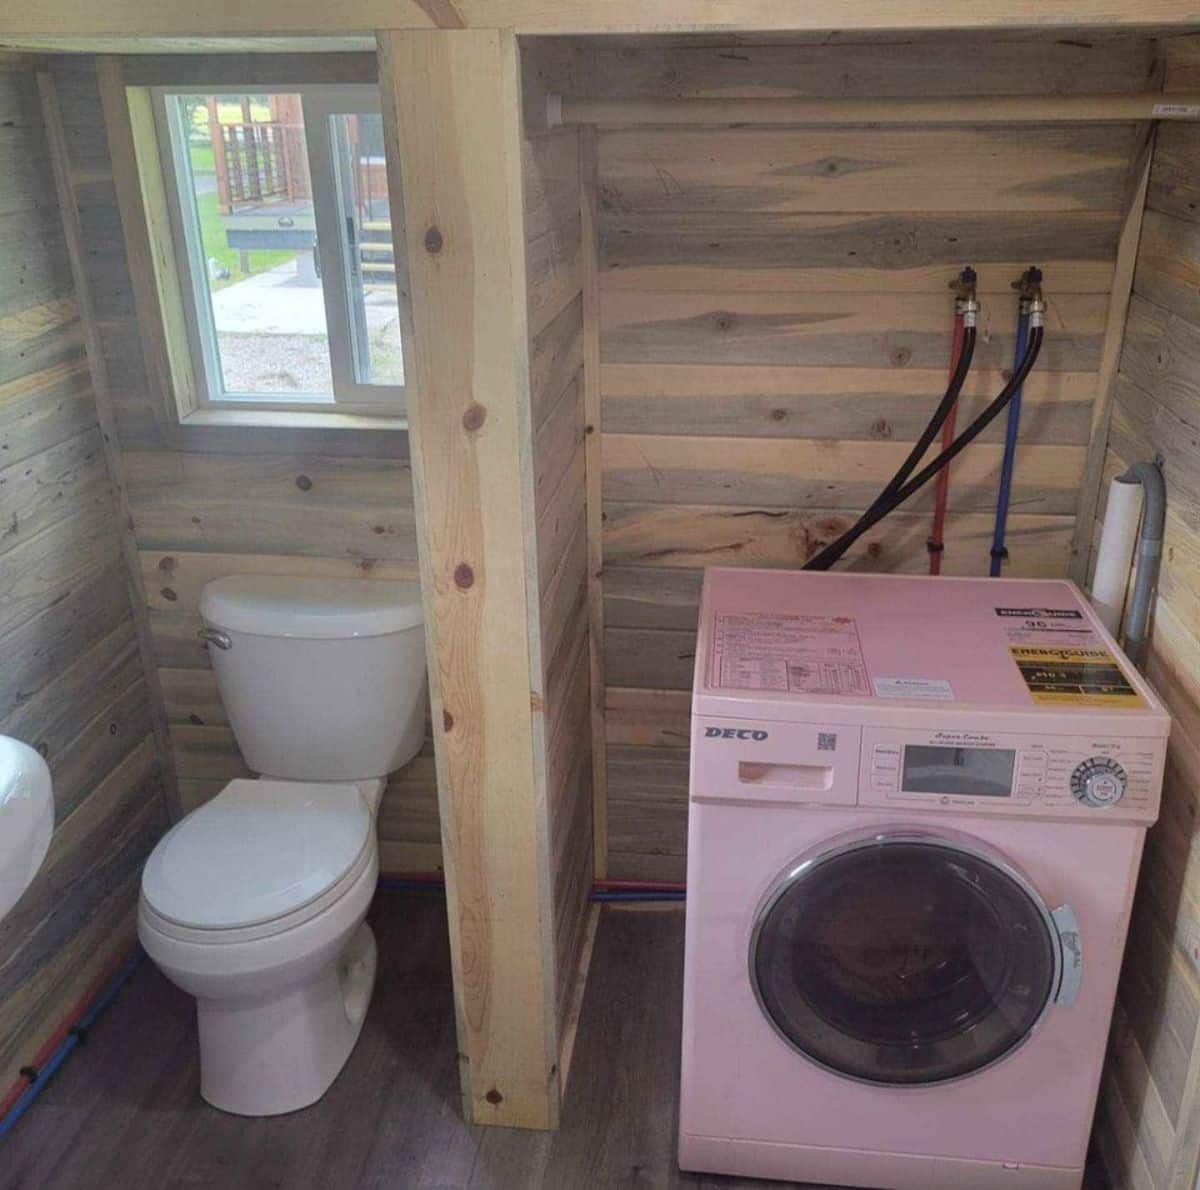 2 in 1 washer dryer combo of 20’ tiny house with two lofts